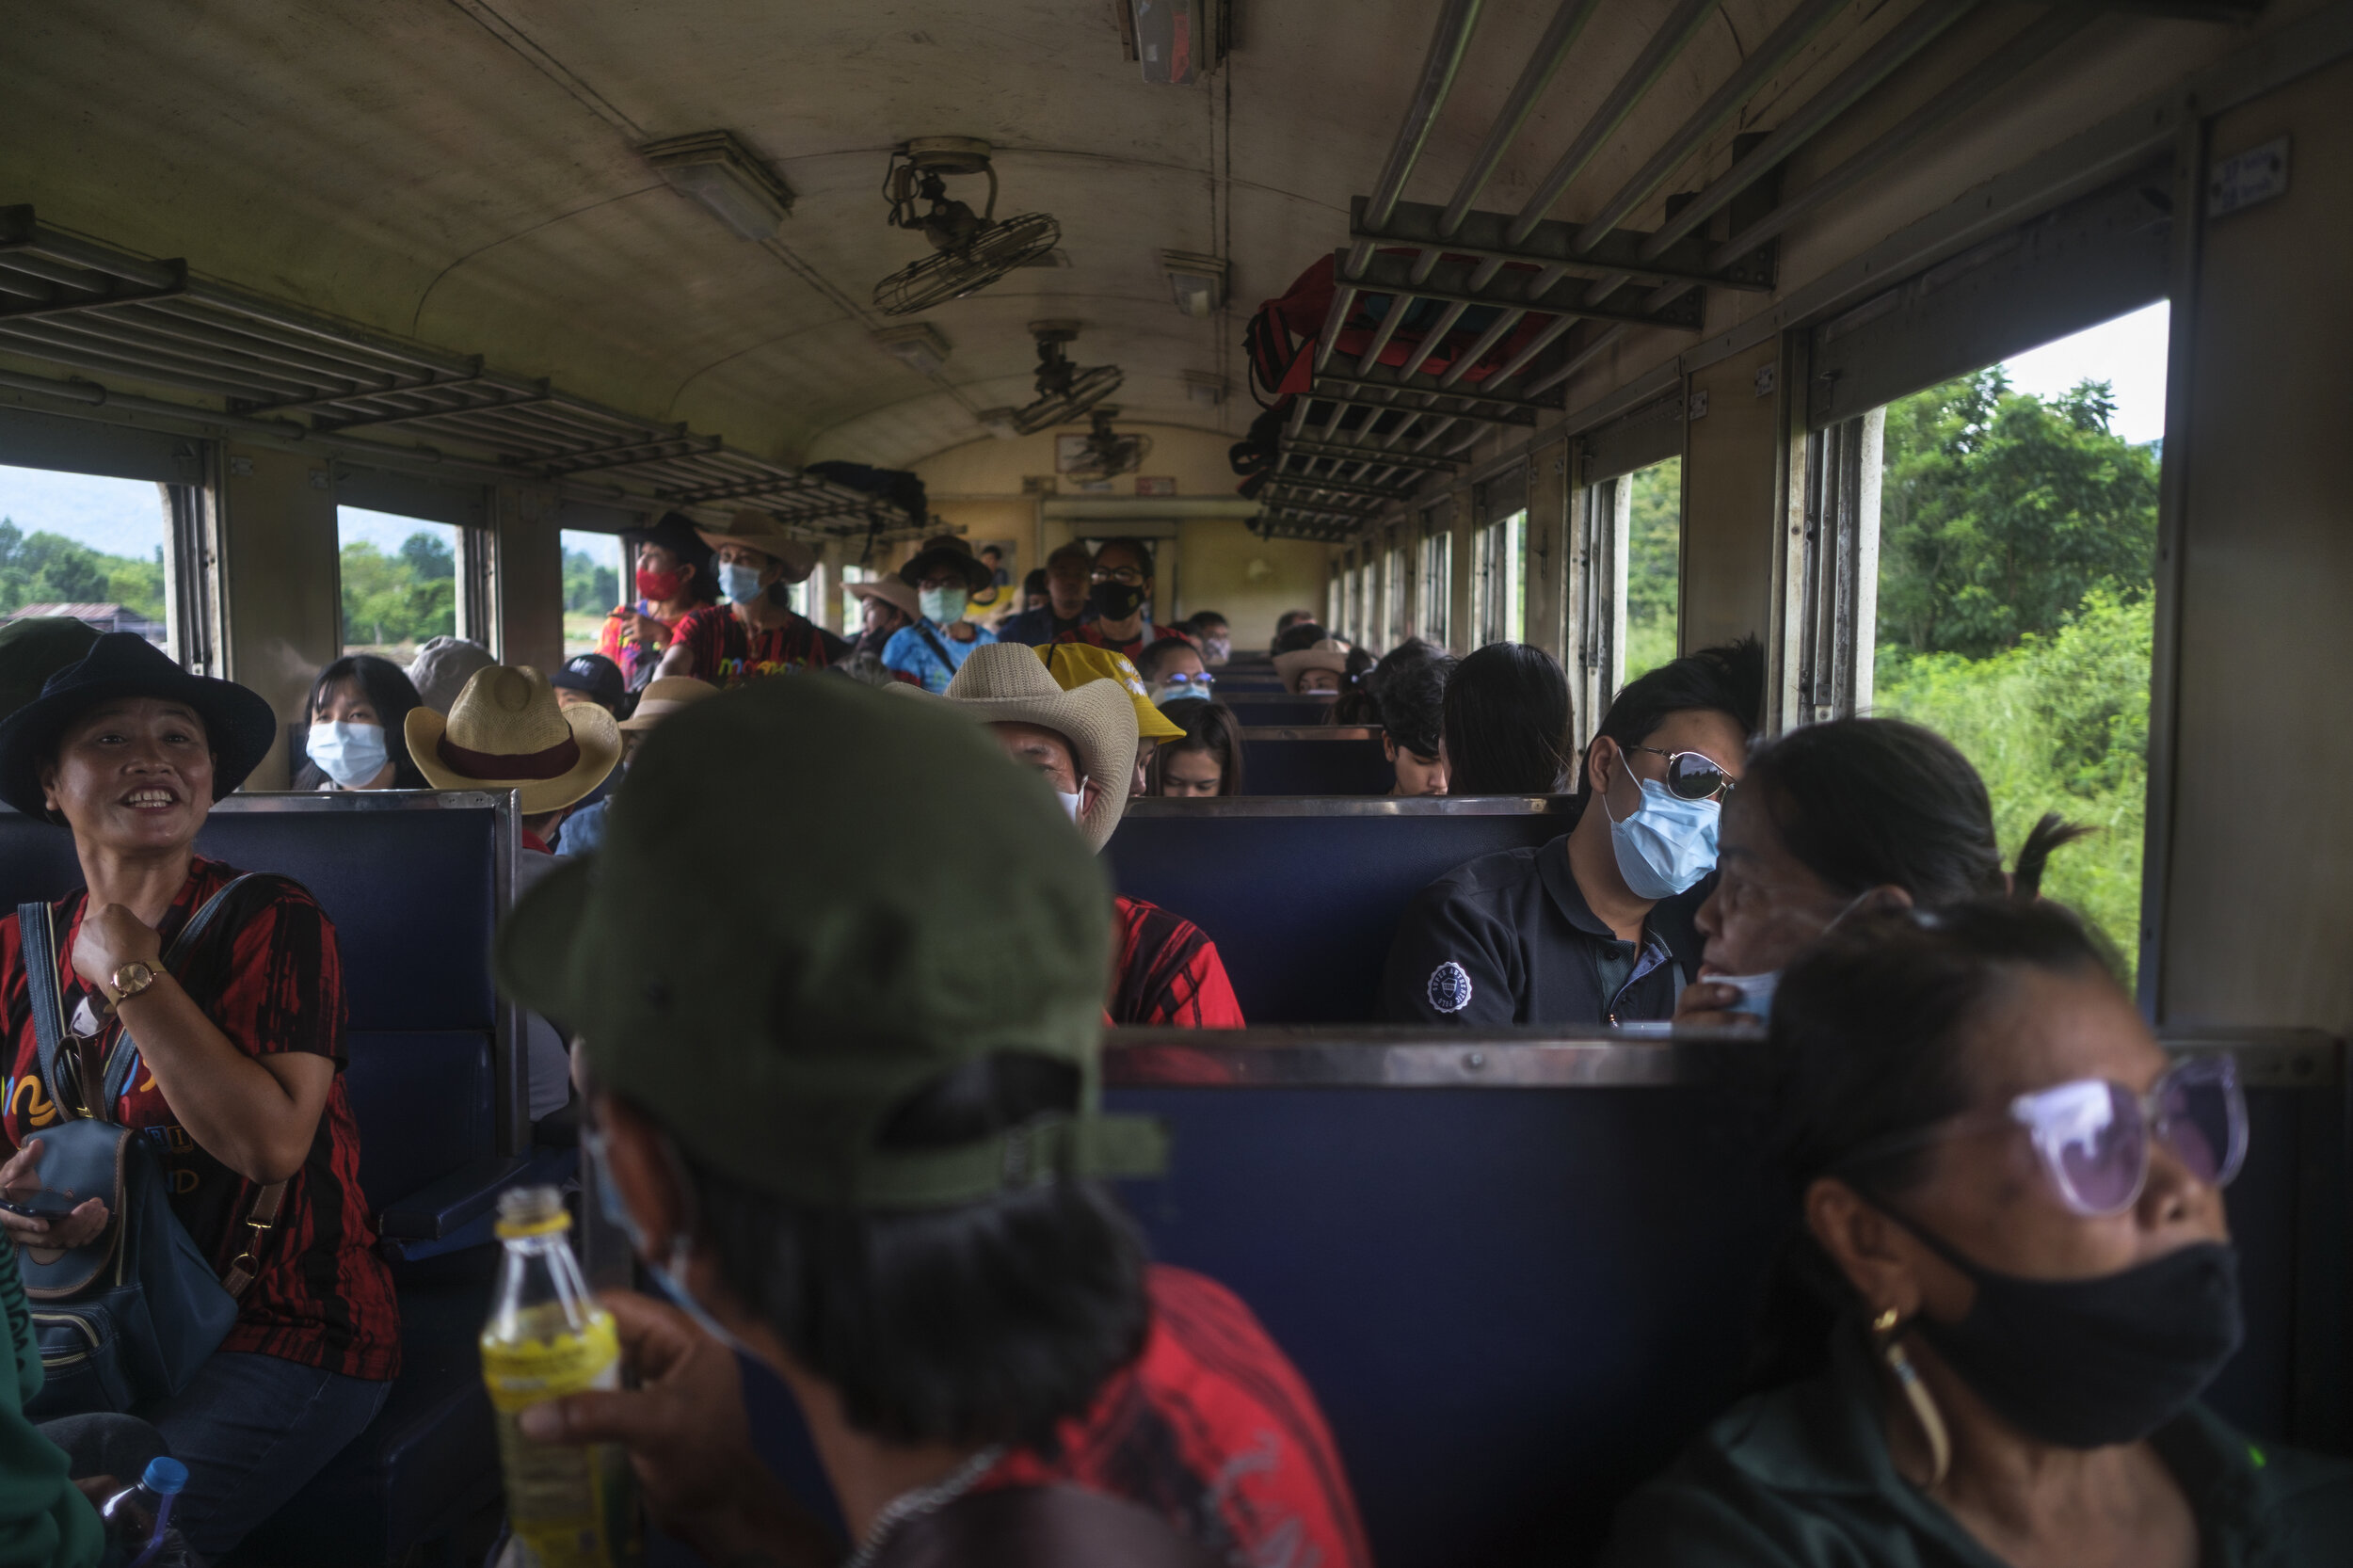  Passengers en route to Nam Tok. The train travels along the infamous ‘death railway’ built by Allied prisoners of war during World War II. 